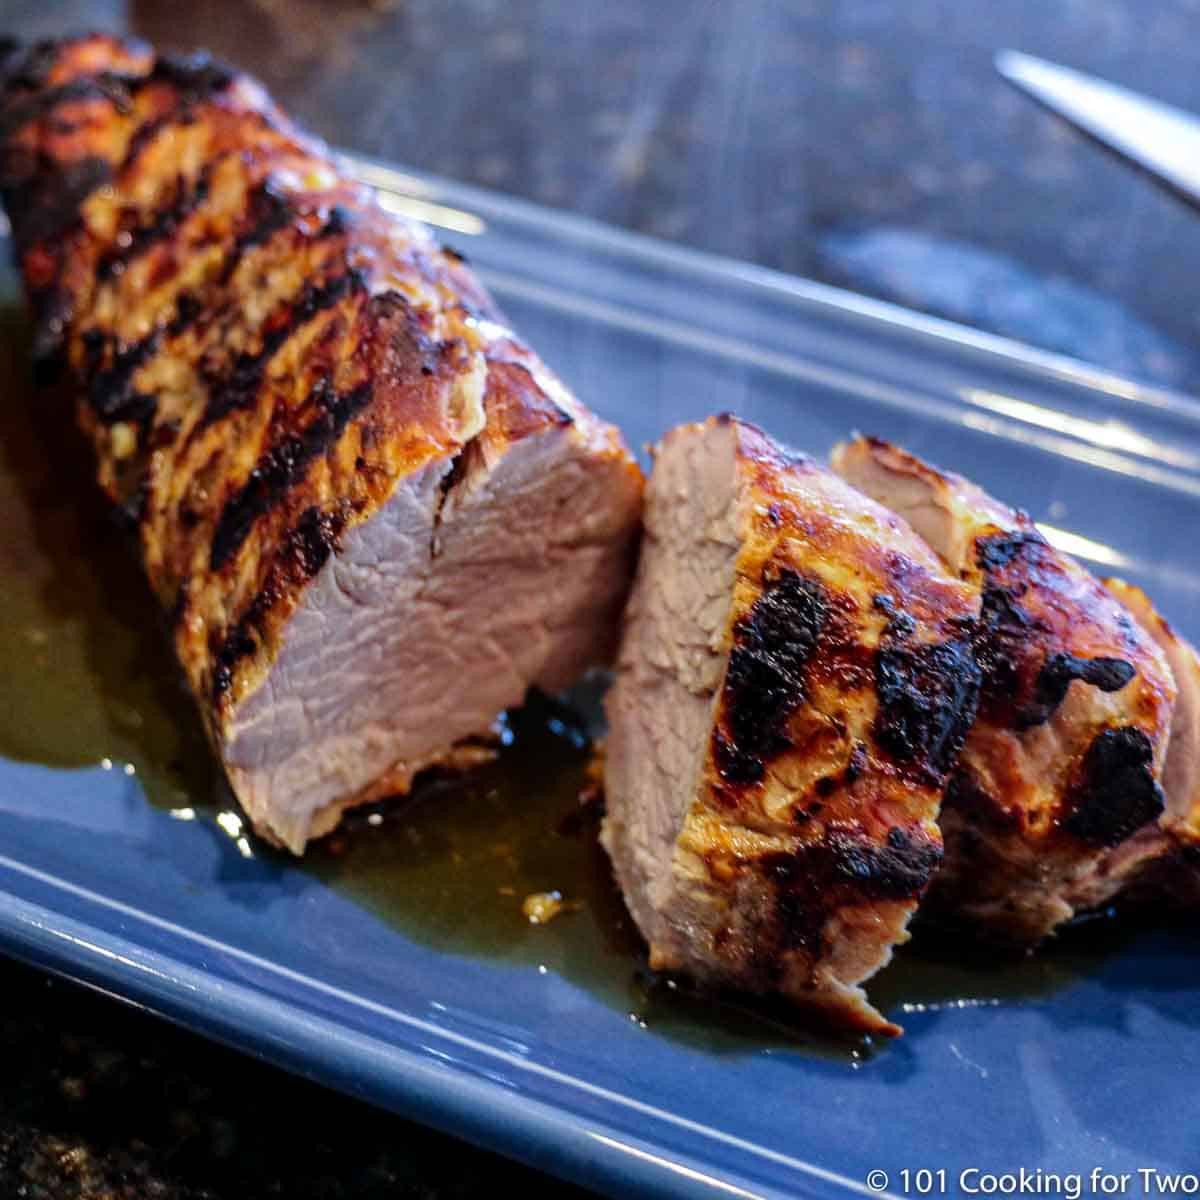 Cooking Pork Loin On Grill
 How to Grill a Pork Tenderloin on a Gas Grill